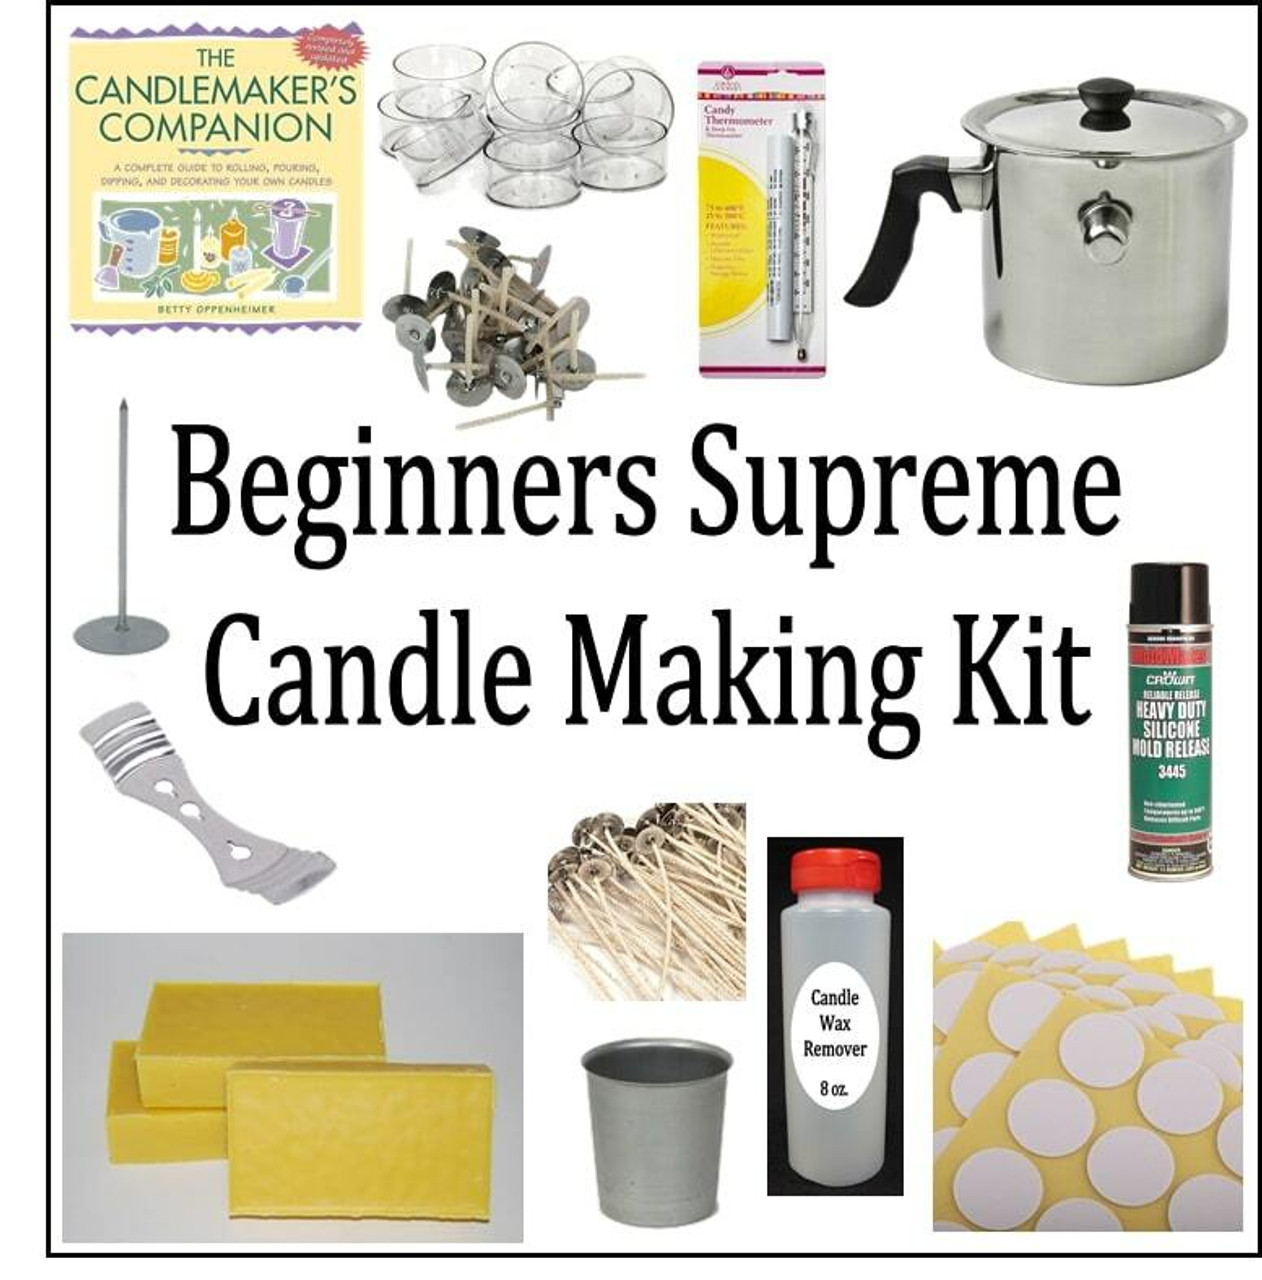 https://cdn11.bigcommerce.com/s-q86nctjasv/images/stencil/1280x1280/products/1618/3461/beginners-supreme-candle-making-kit-free-shipping-lappesbeesupply__50254.1691036026.jpg?c=1